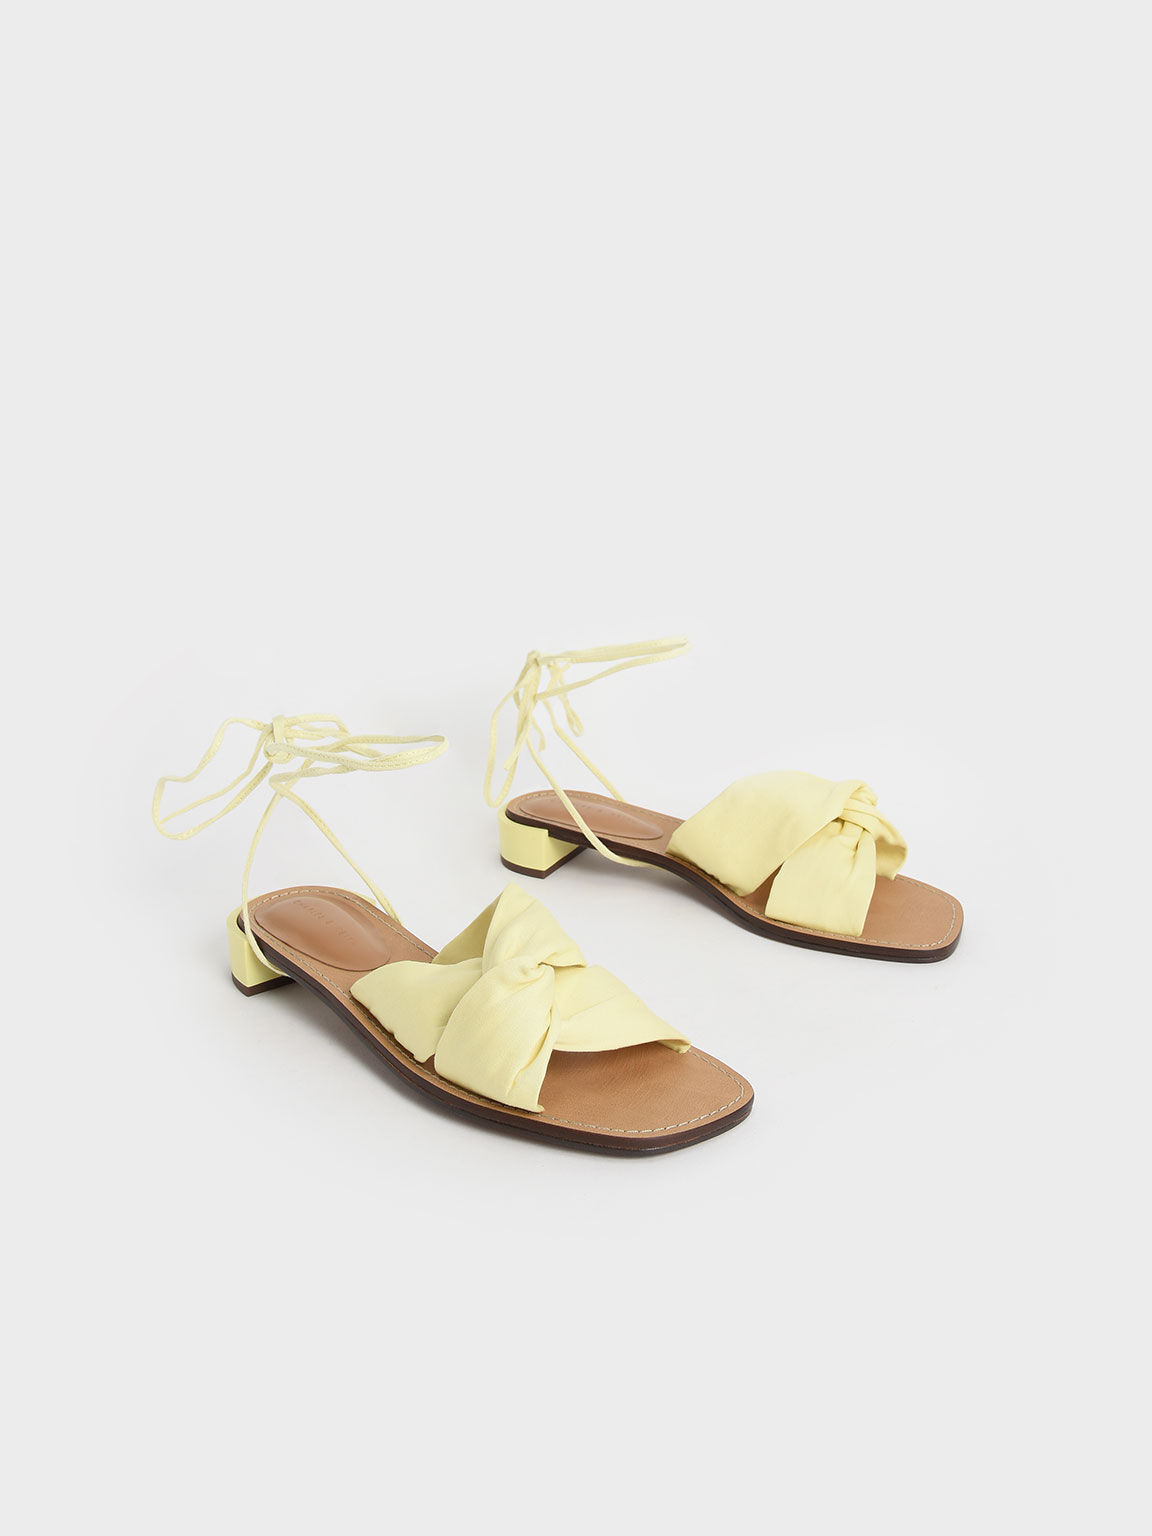 Knotted Tie-Around Sandals, Yellow, hi-res